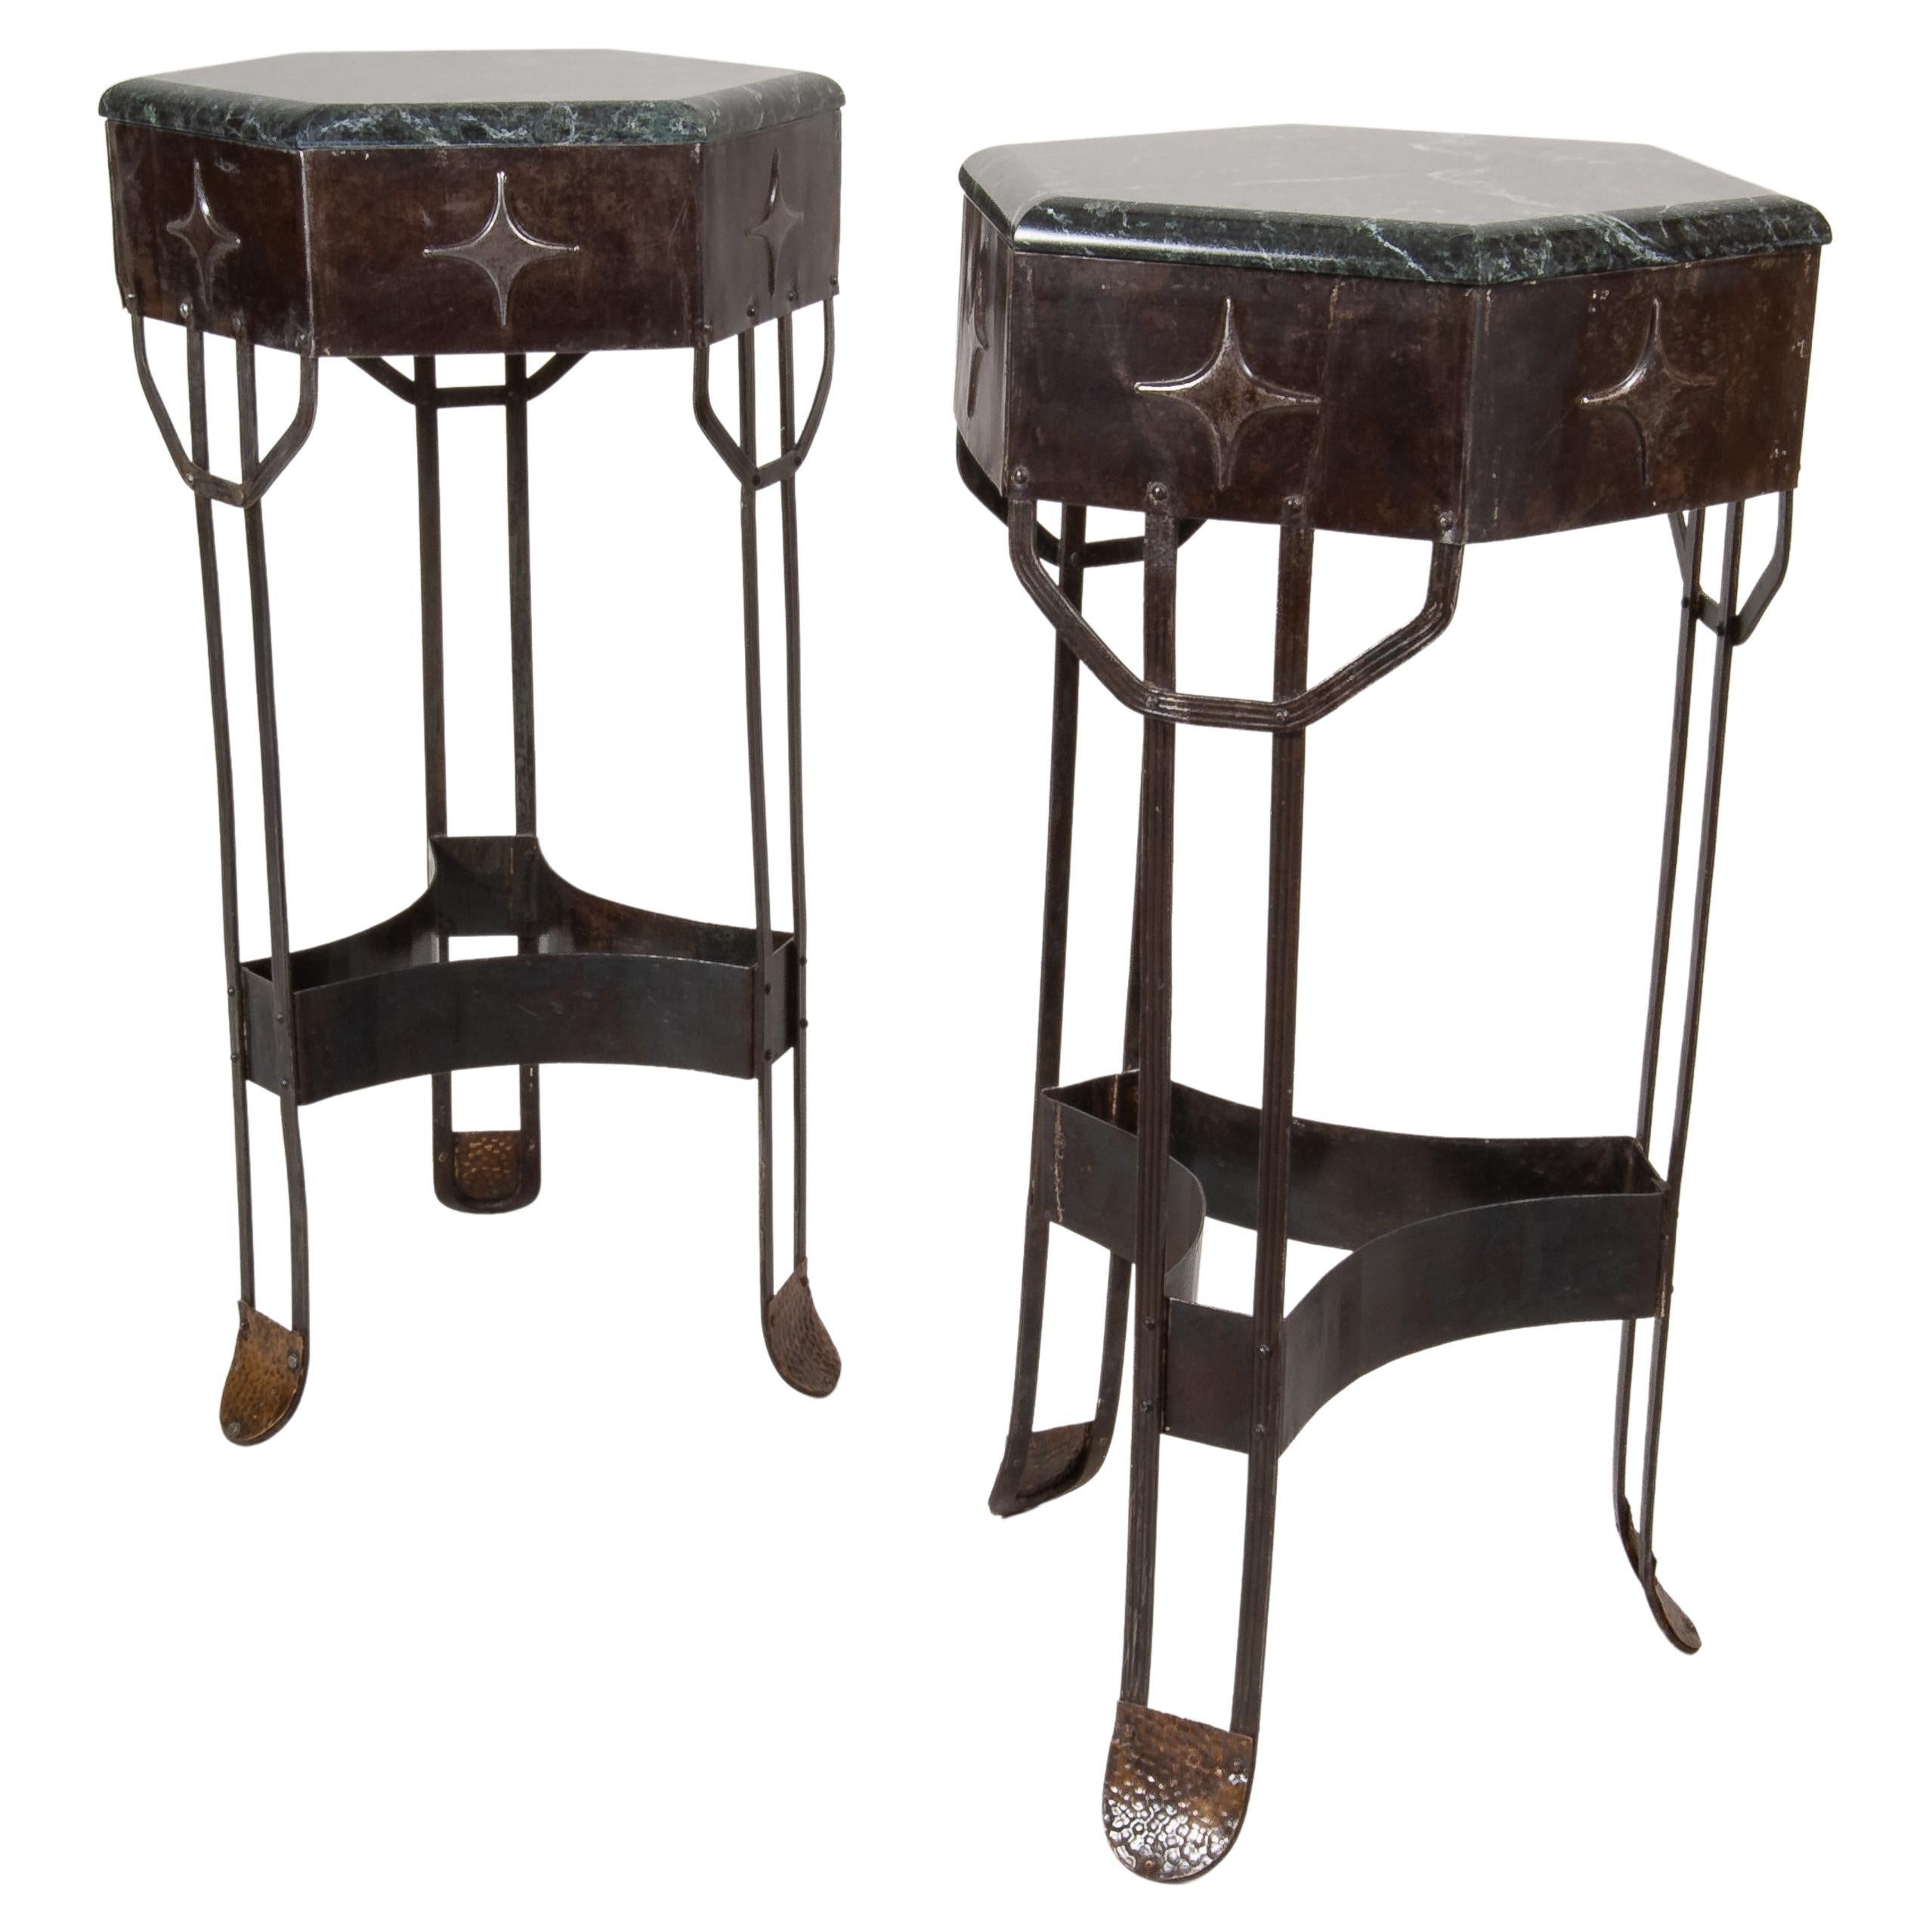 Beautiful Pair of Art Deco Wrought Iron Pedestals with Green/Black Marble Top